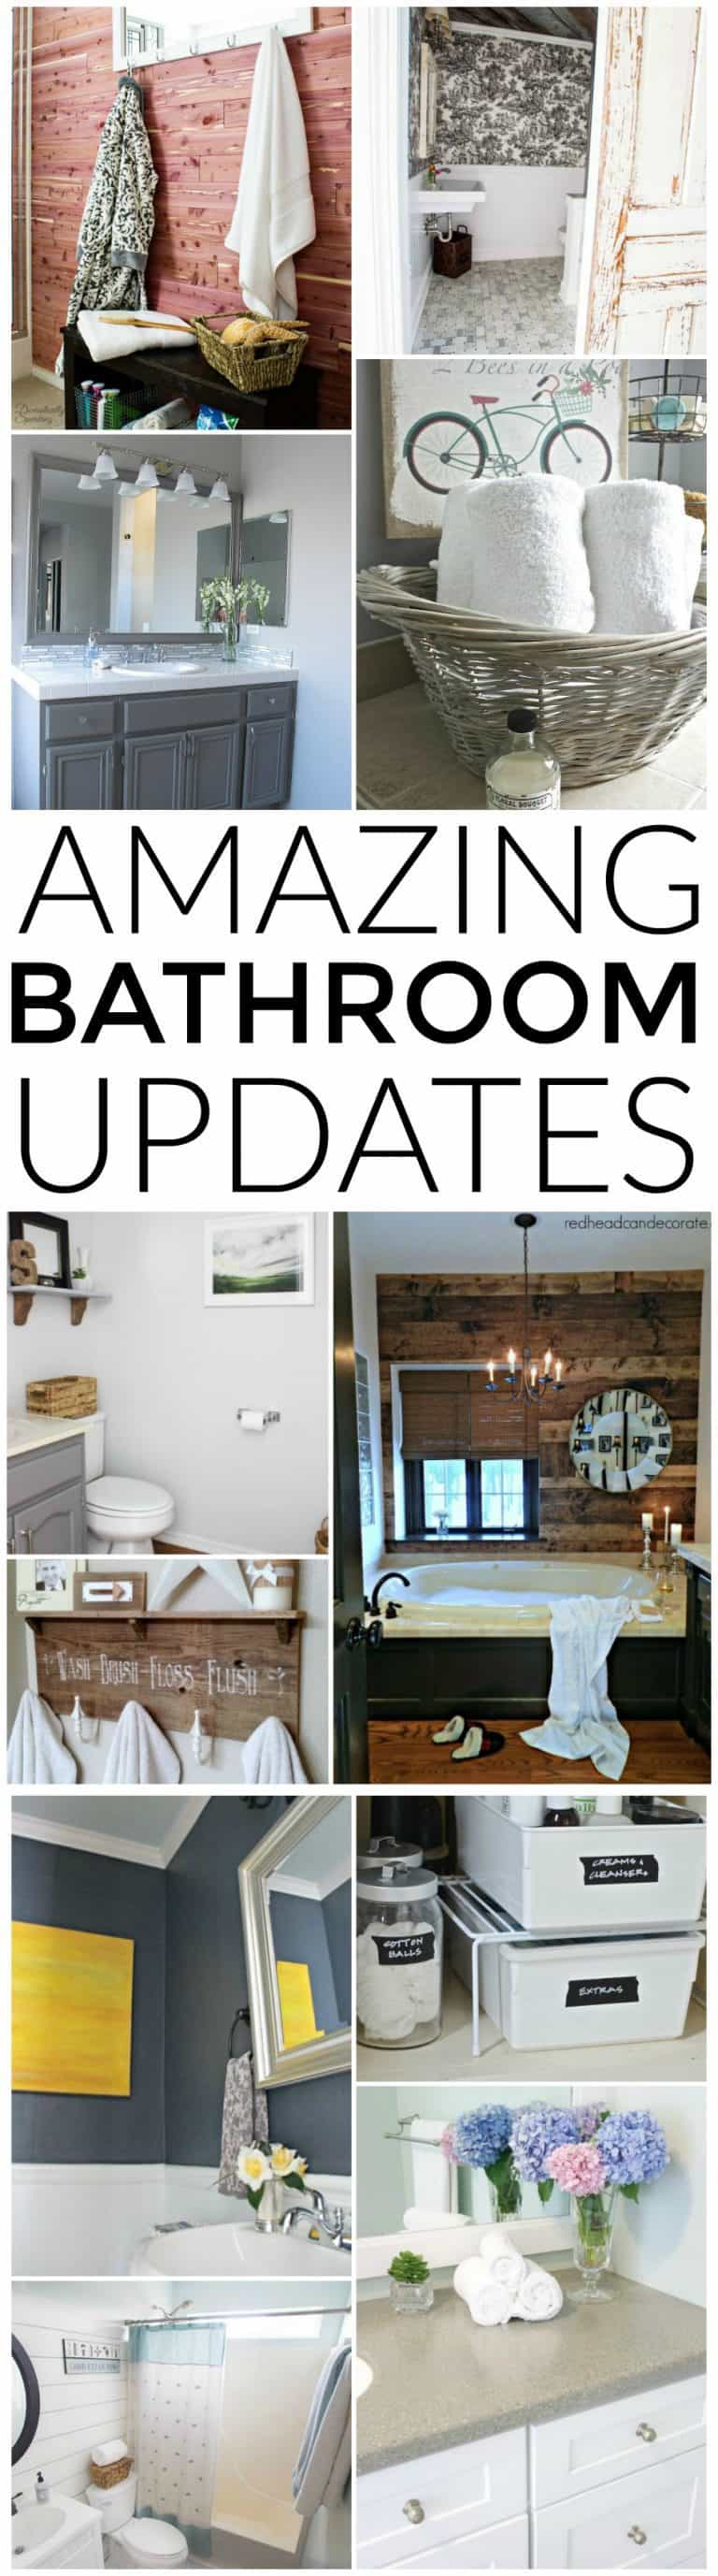 DIY Housewives Amazing Bathroom Updates - At Charlotte's House